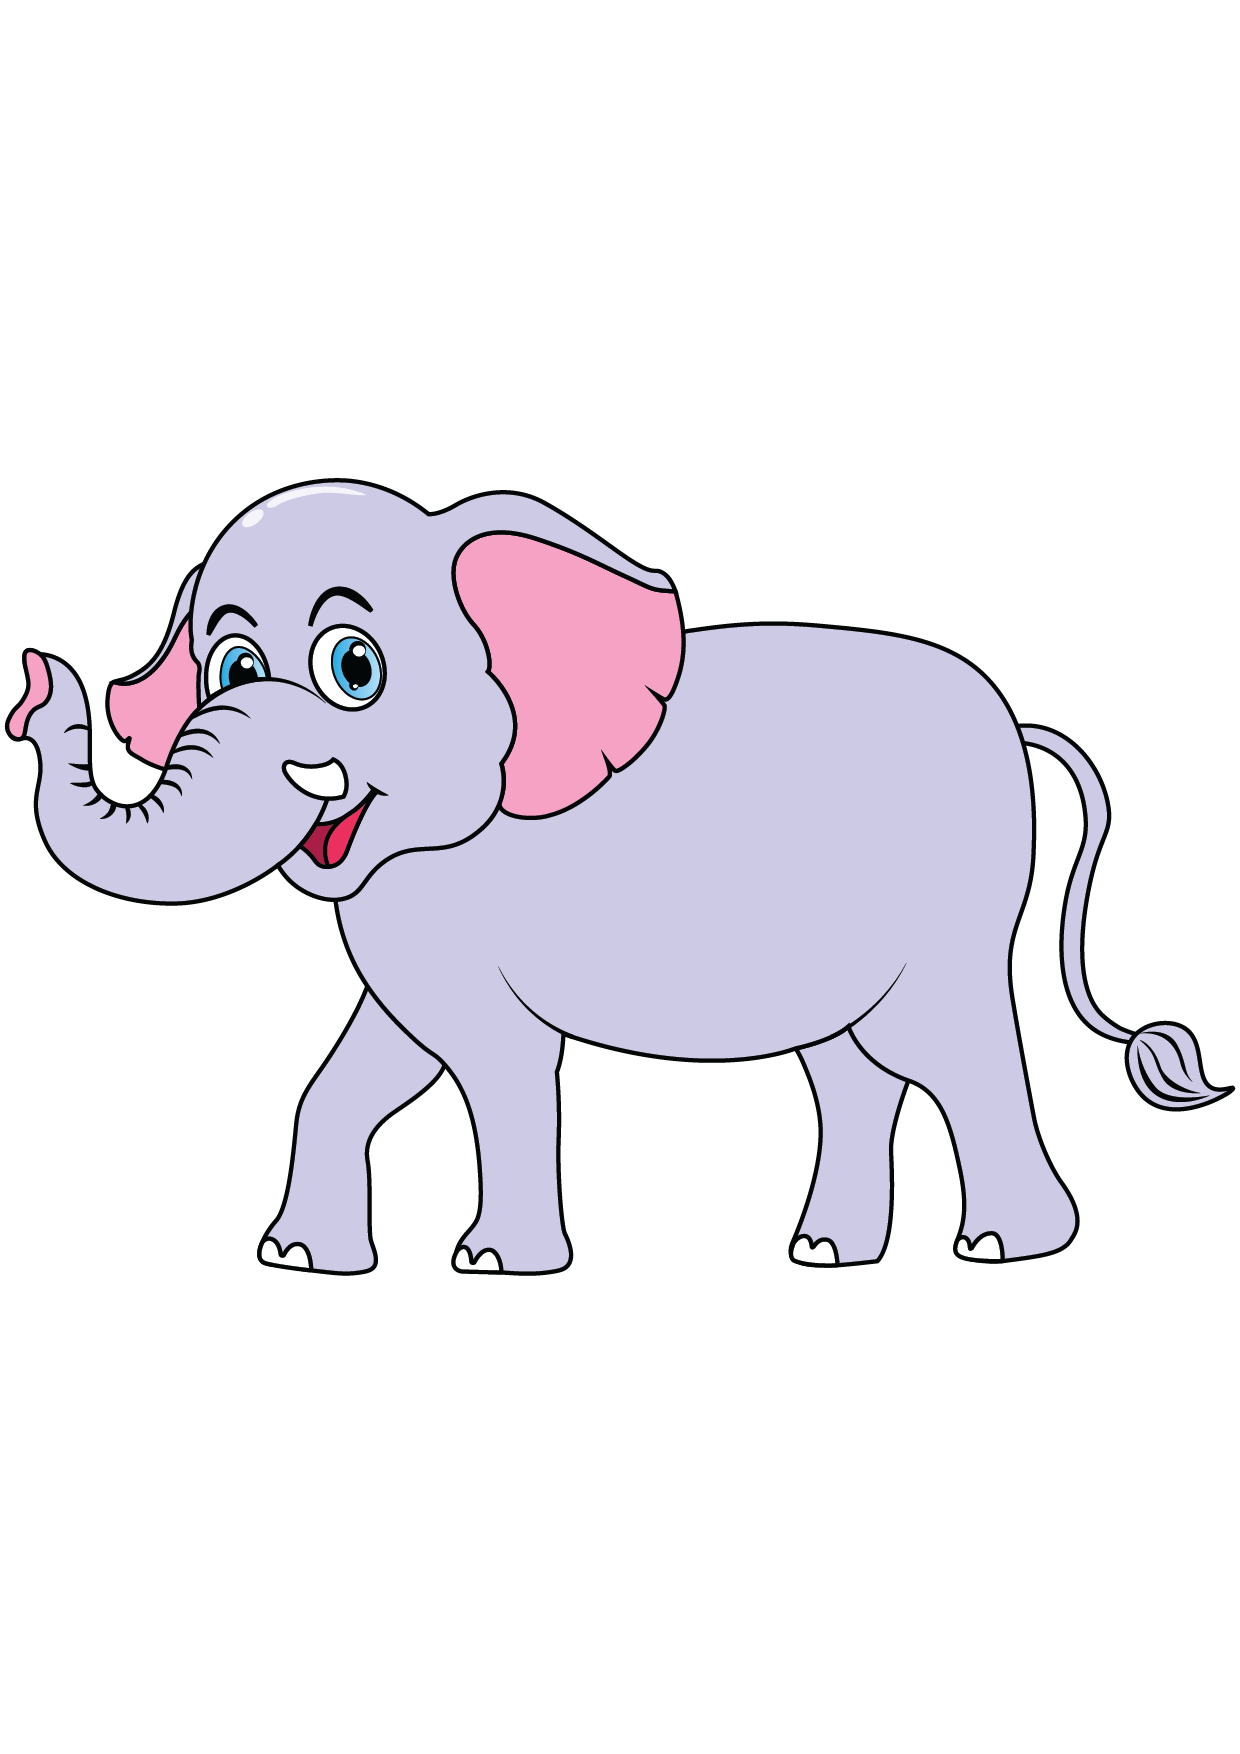 How to Draw An Elephant Step by Step Printable